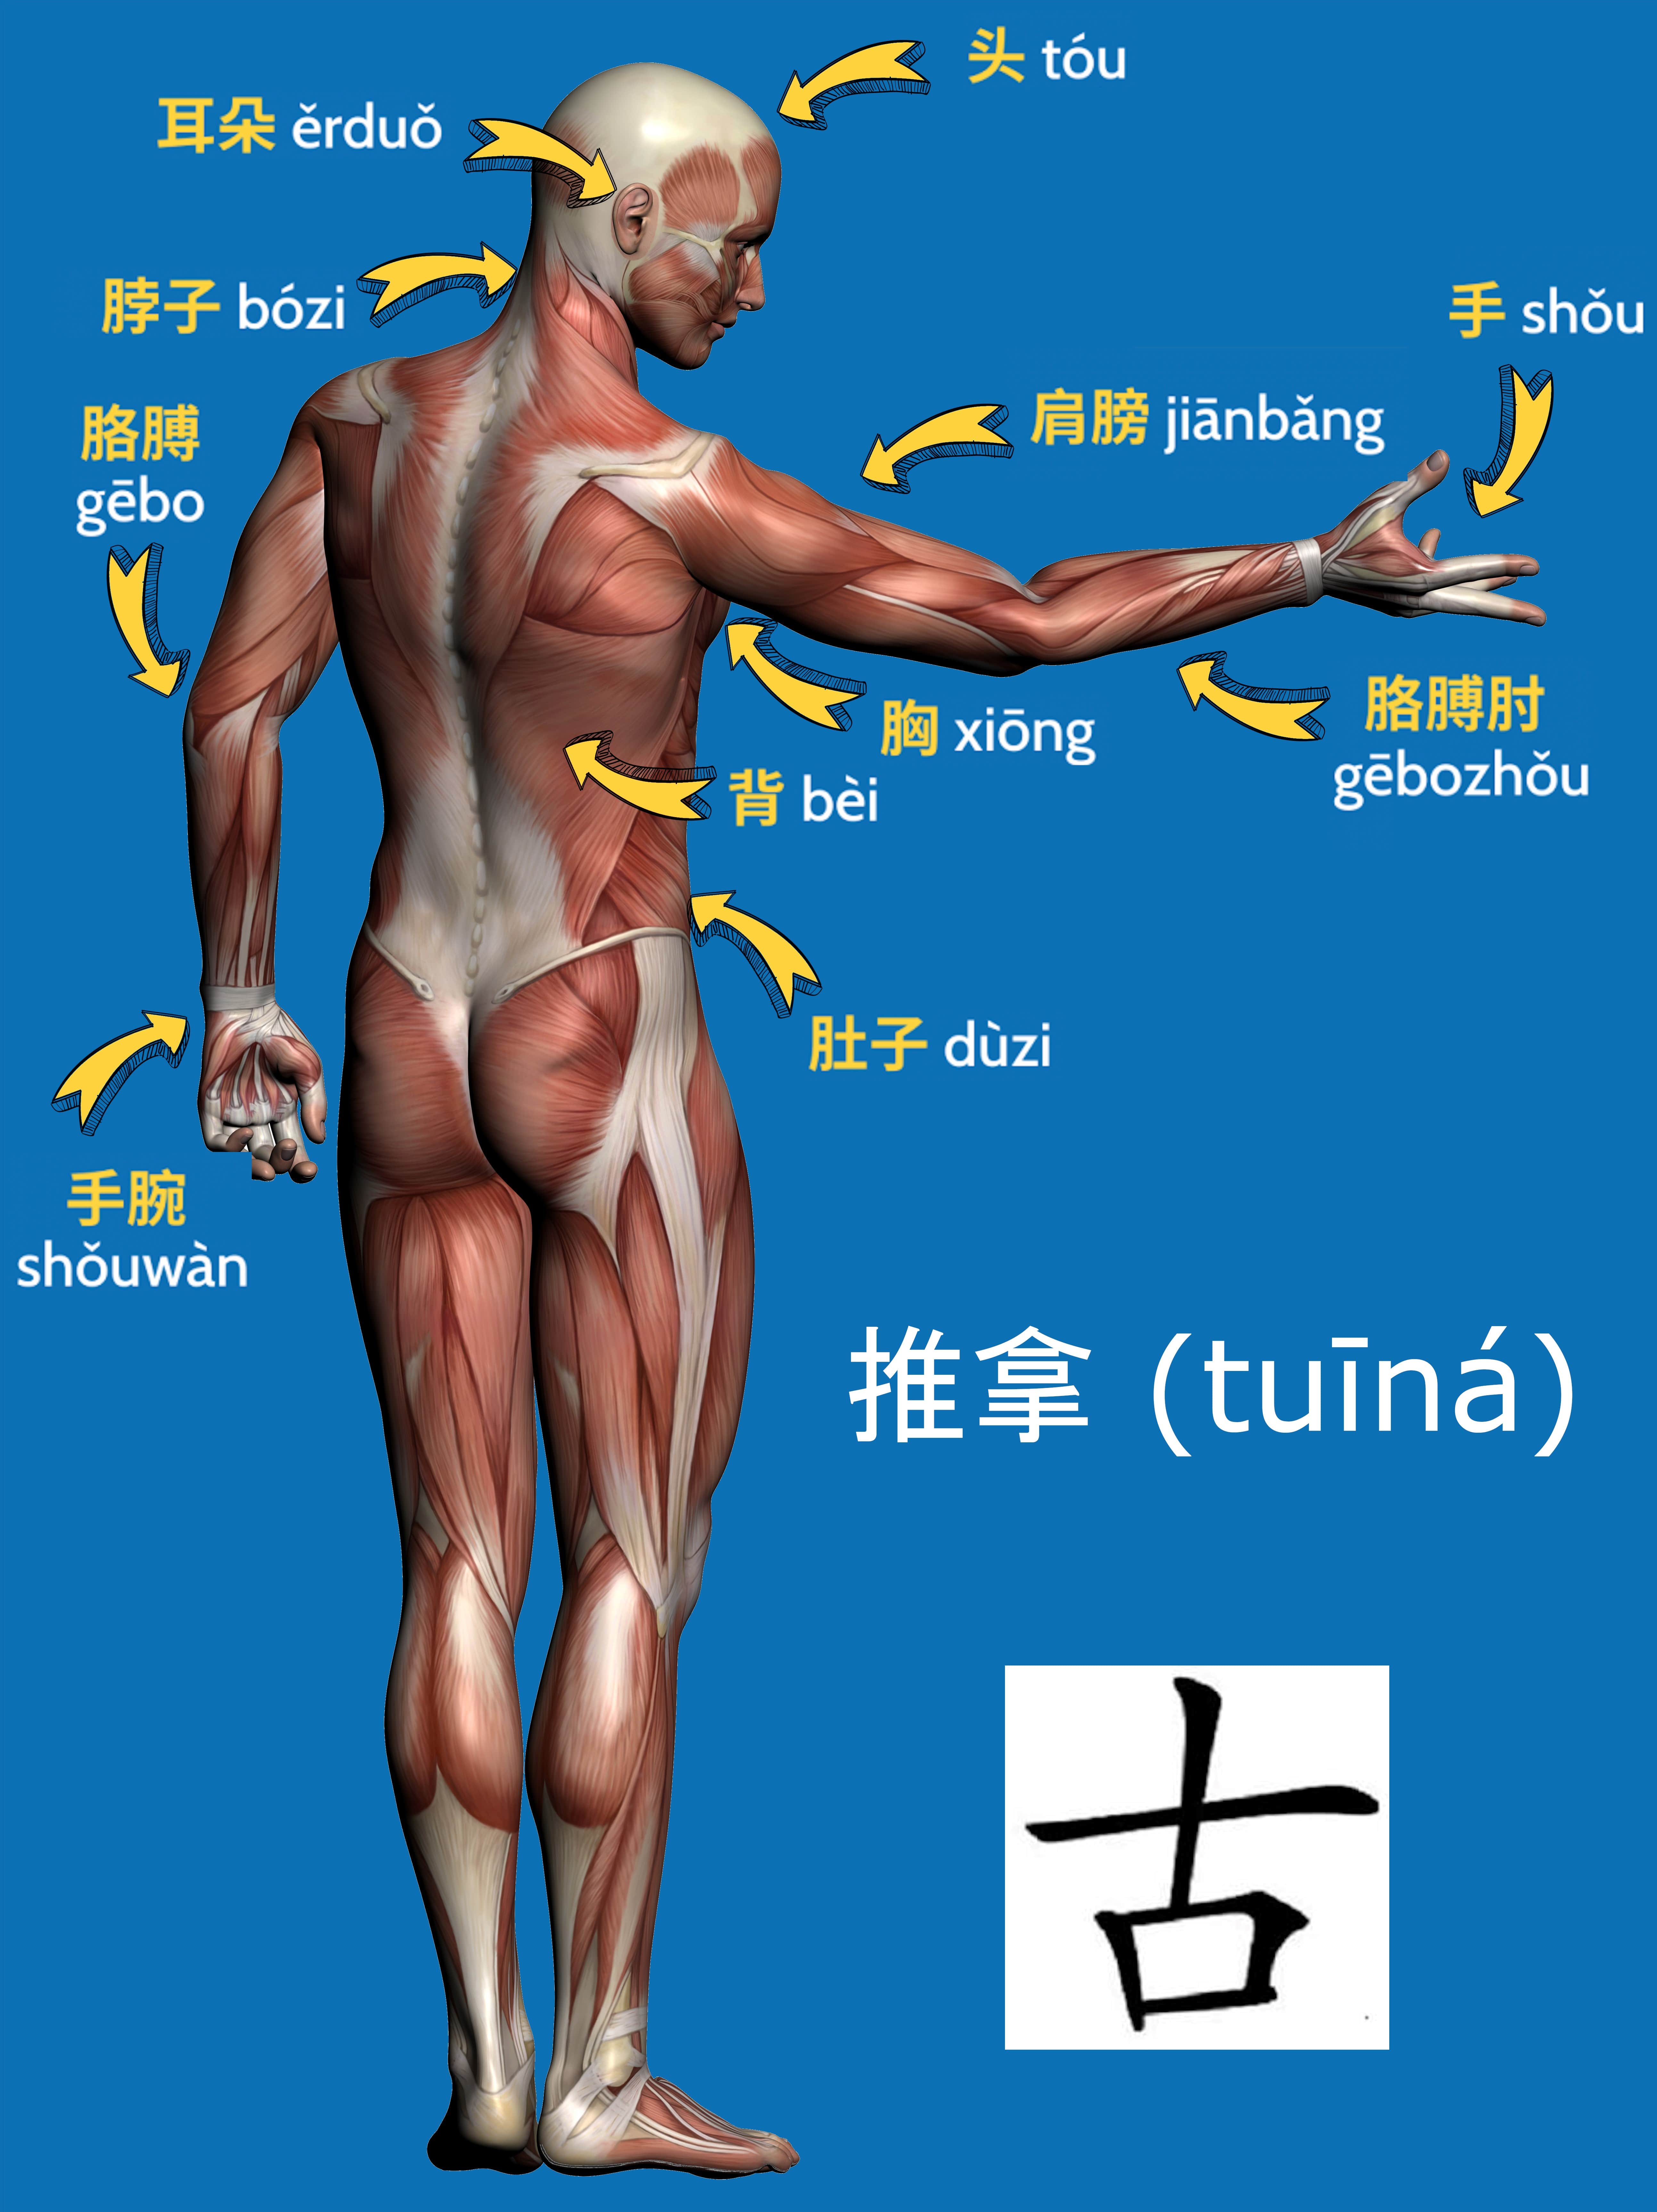 Chinese Traditional Massages explanation of body parts in Mandarin 